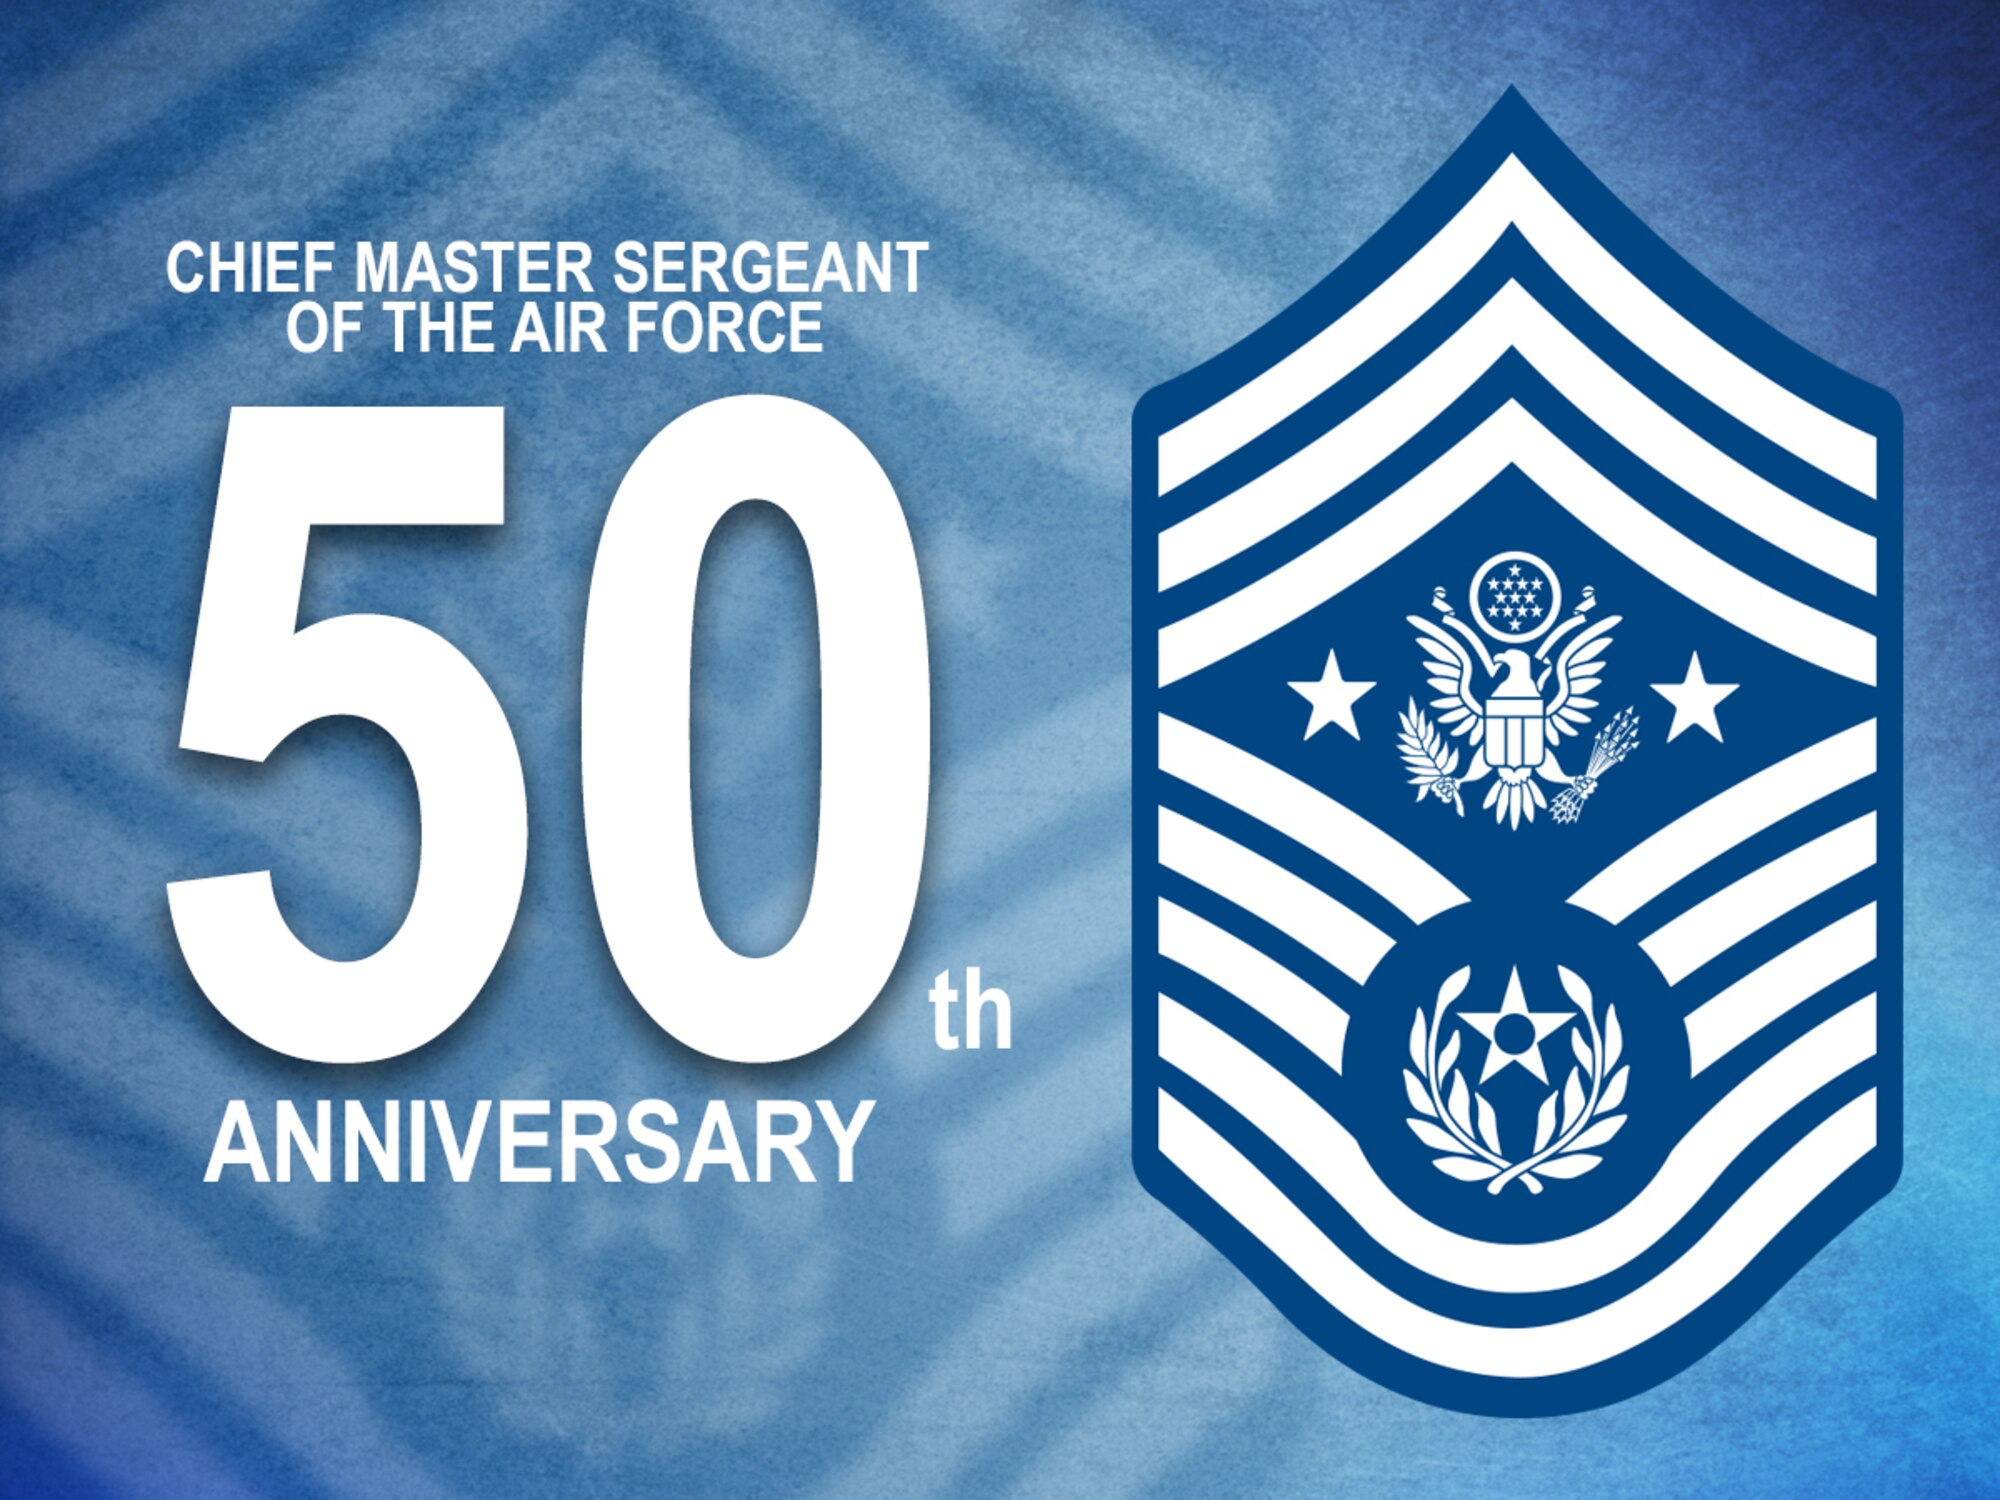 In April 1967, Chief Master Sgt. Paul Airey set on a path untraveled by any other Airman in the U.S. Air Force, and became the first chief master sergeant of the Air Force. Since then, only 17 other men have followed in Airey’s esteemed path, yet the impact of these Airmen continuously ricocheted across the force. 